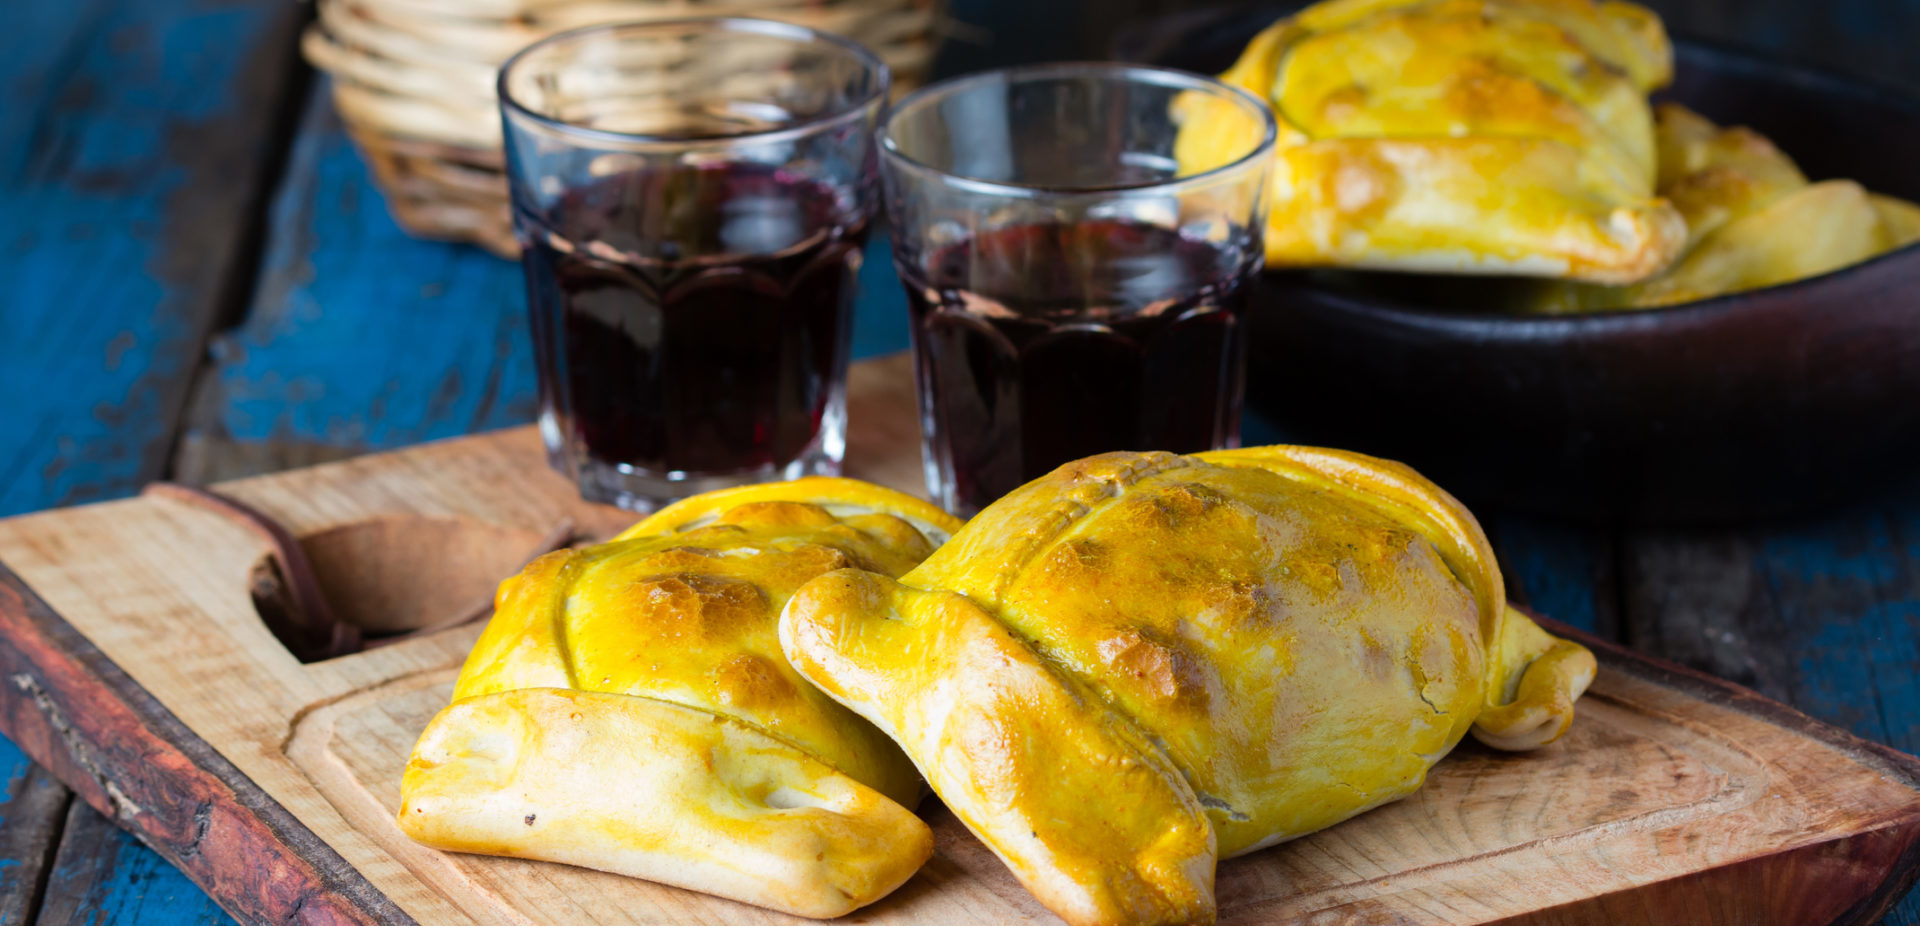 Empanadas on a plate with a glass of wine.